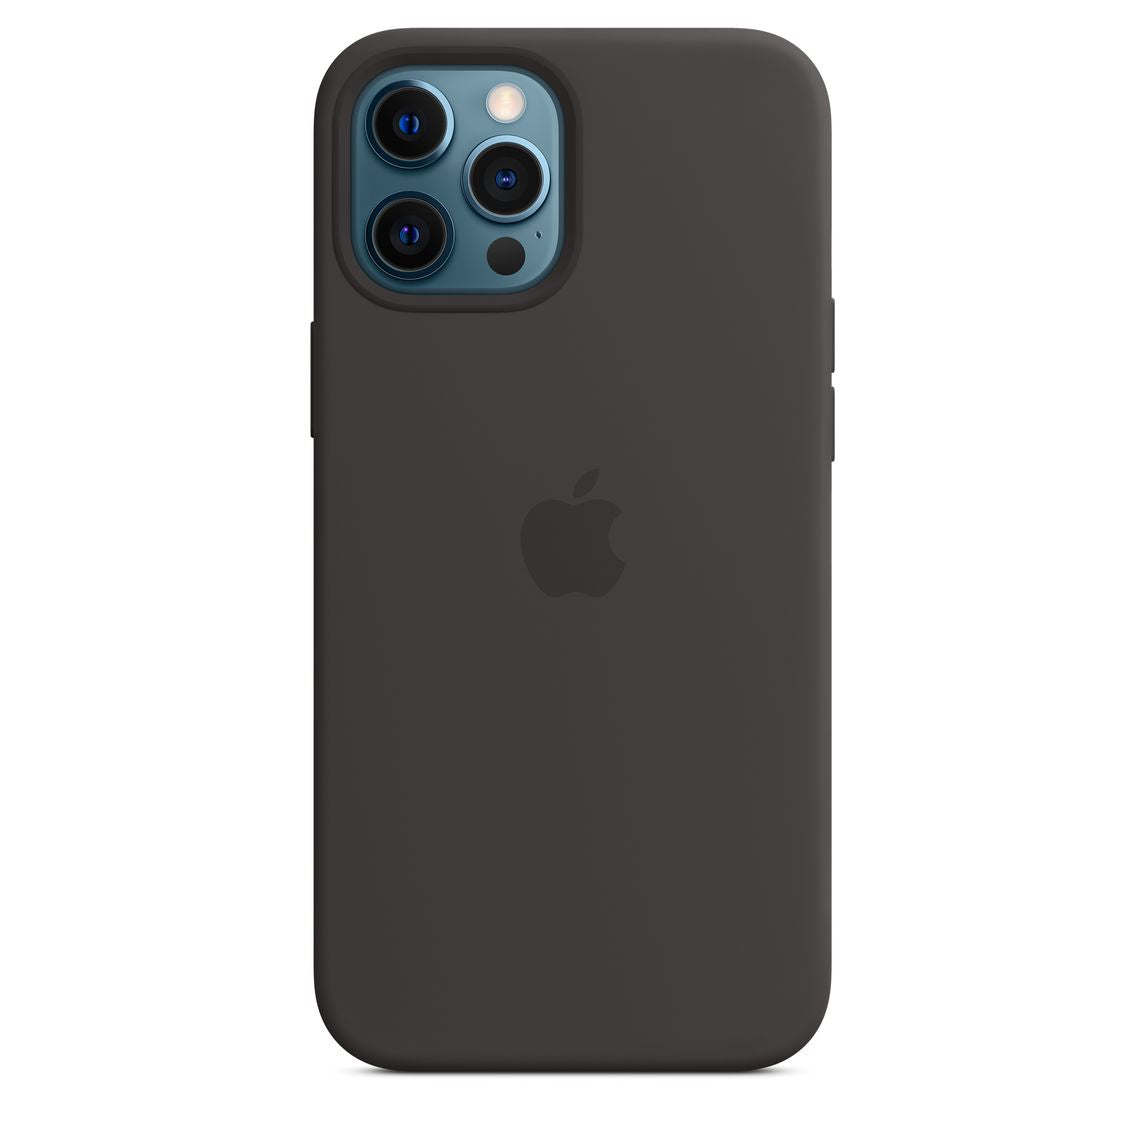 iPhone 12 Pro Max Silicone Case - New - Mac Shack